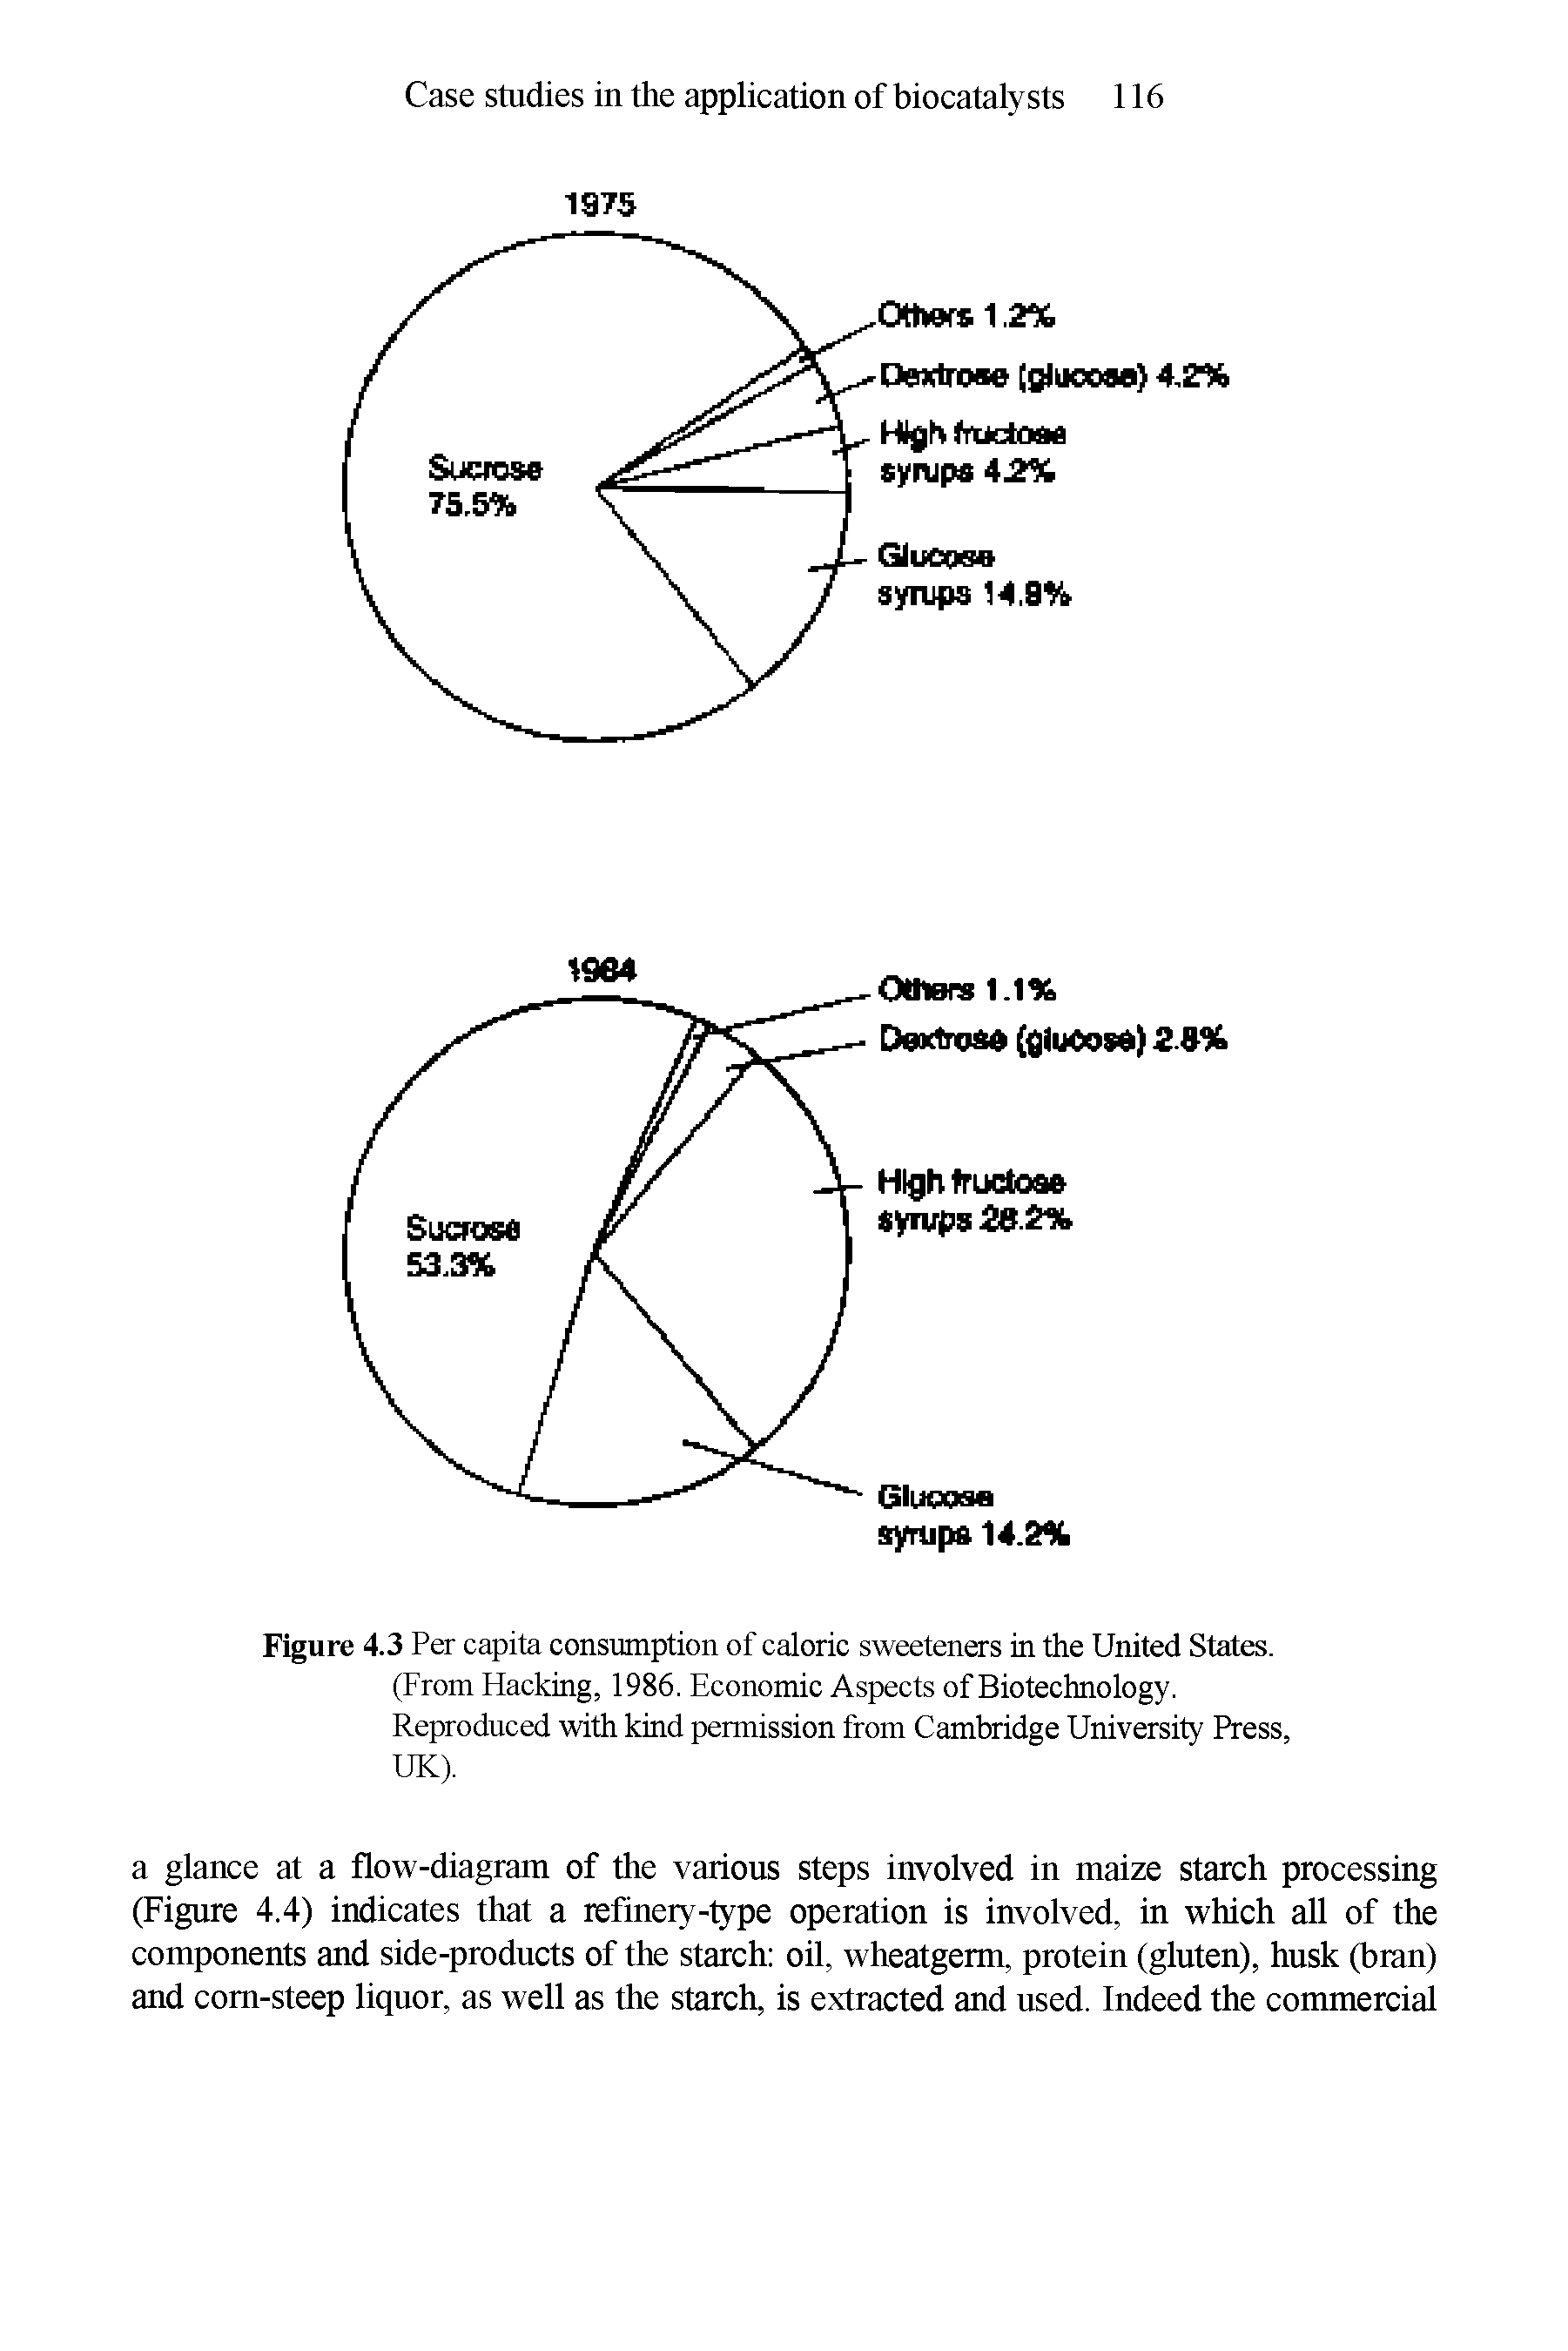 Figure 4.3 Per capita consumption of caloric sweeteners in the United States. (From Hacking, 1986. Economic Aspects of Biotechnology. Reproduced with kind permission from Cambridge University Press, UK).